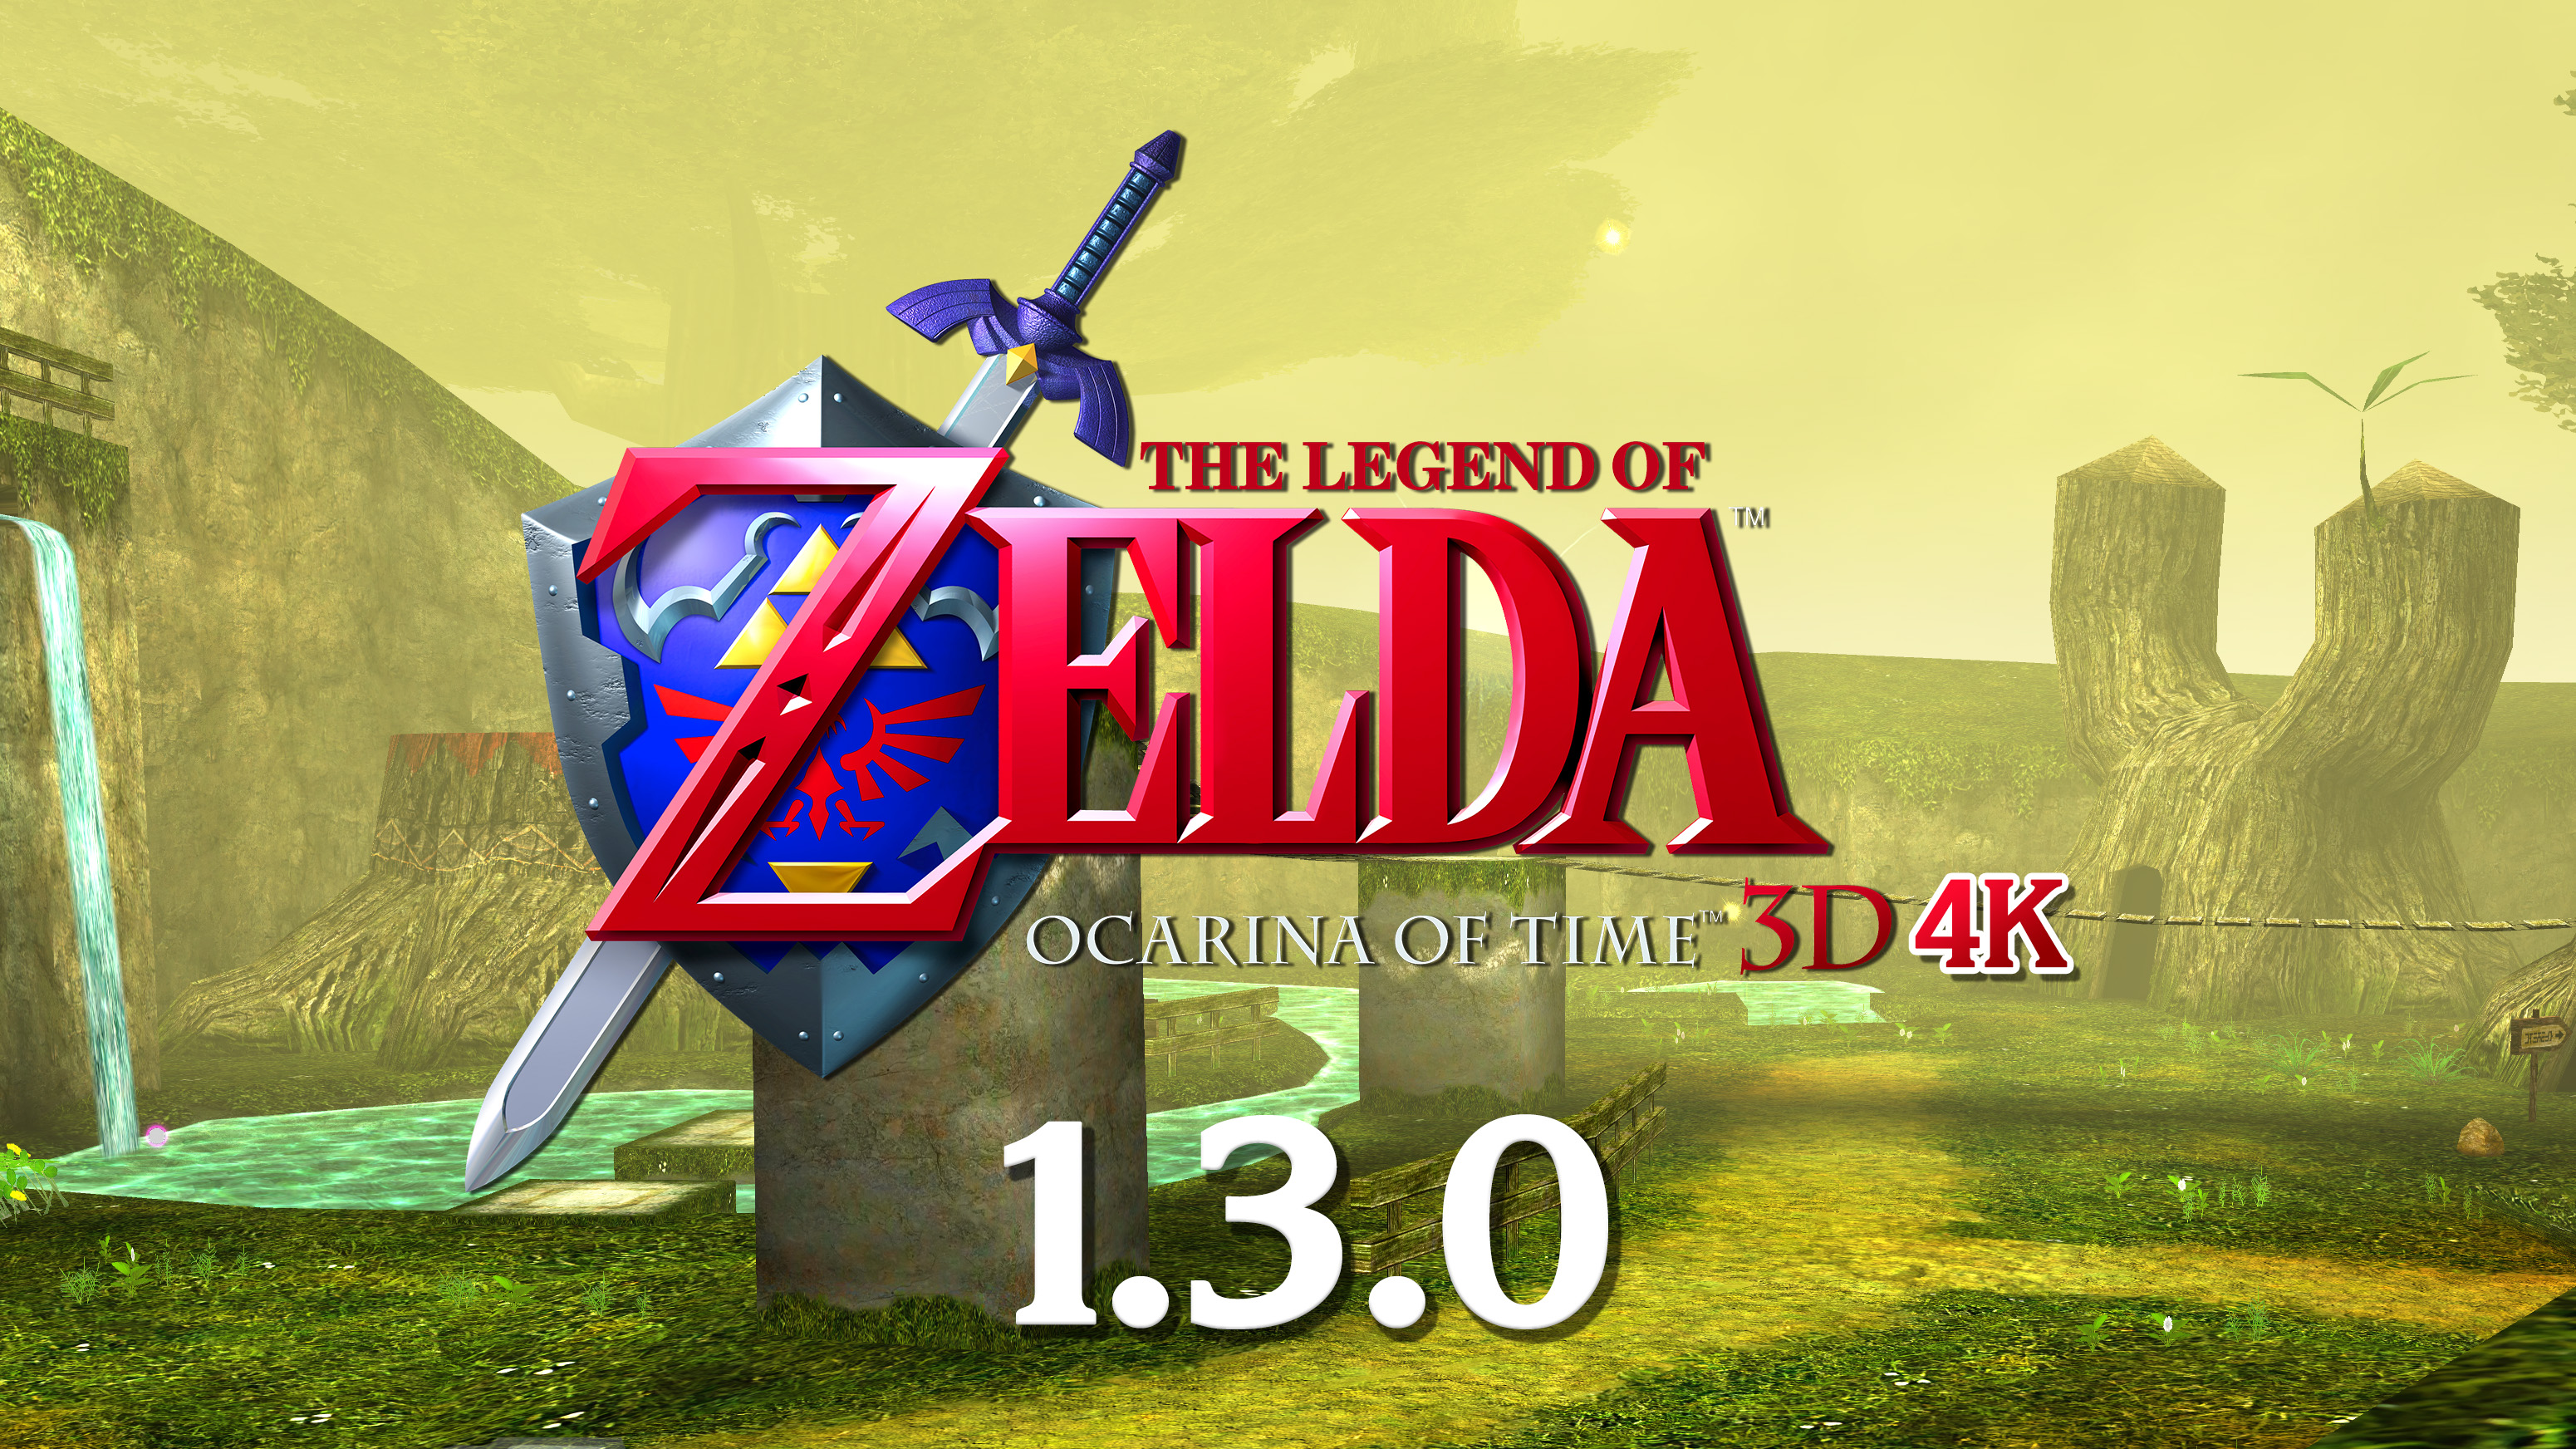 Zelda: Ocarina of Time 3D 4K 1.3.0 Patreon Release by henrikomagnifico  from Patreon